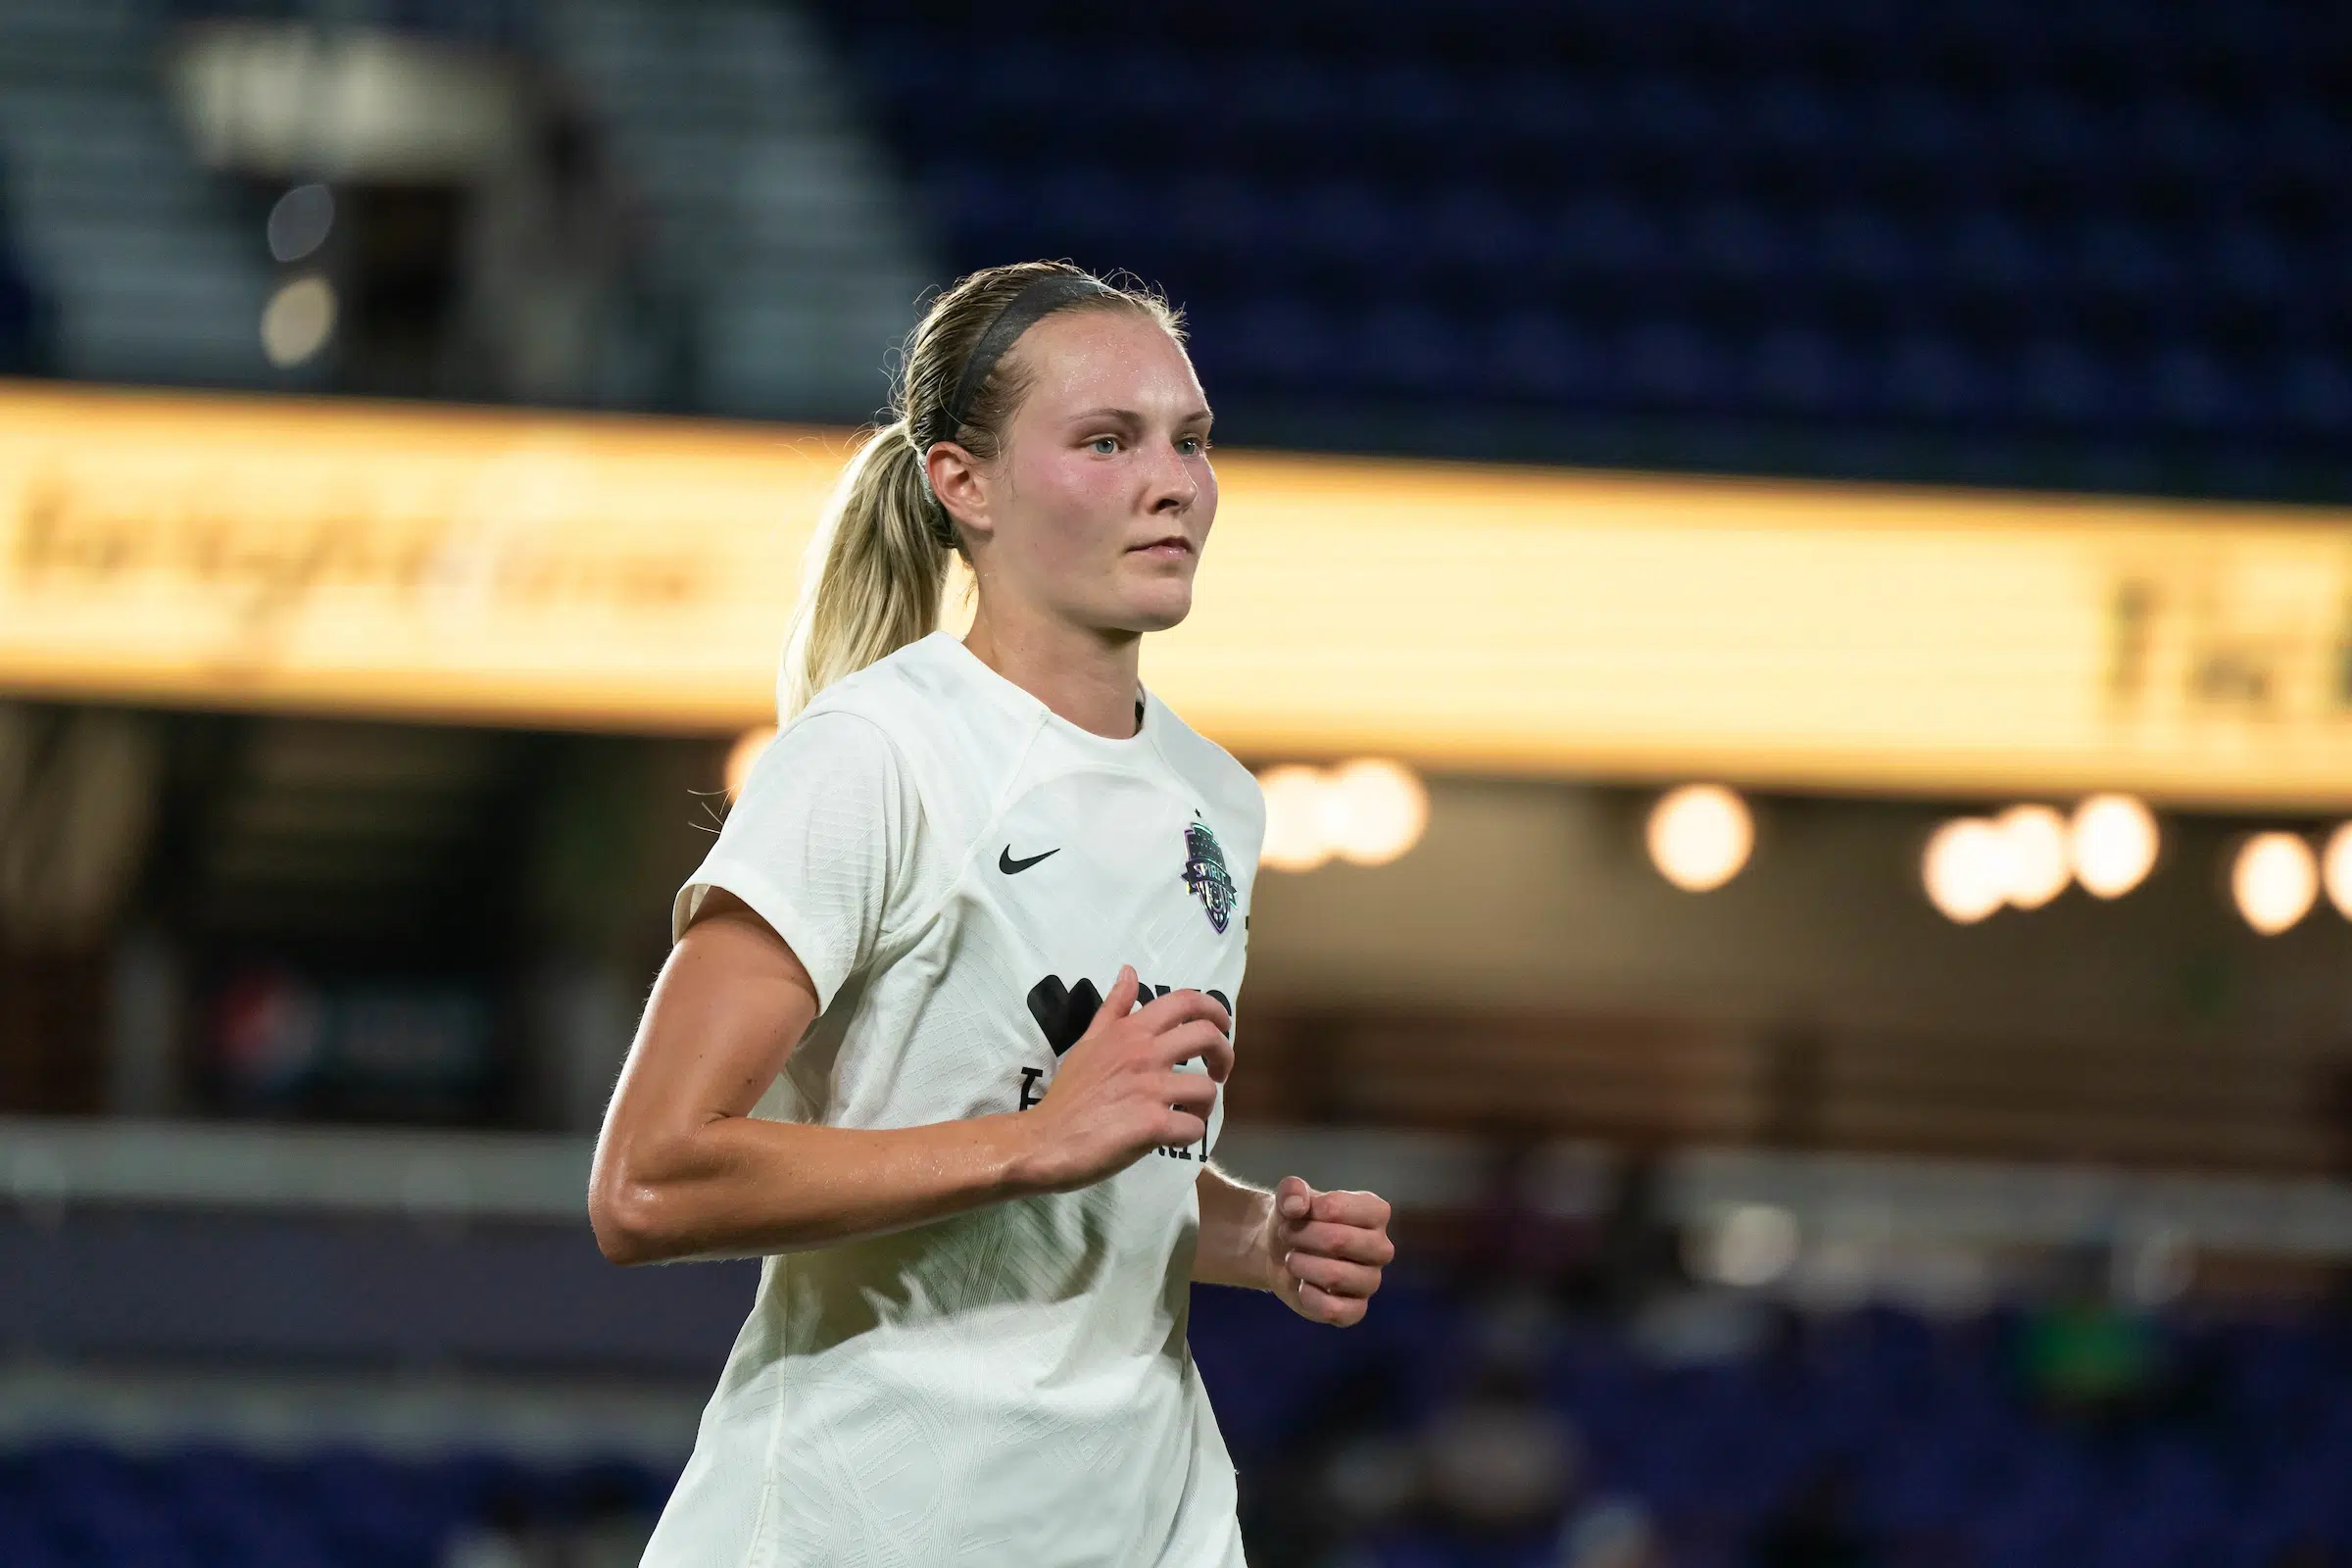 A soccer player in a white uniform with a blonde ponytail runs on a soccer field.